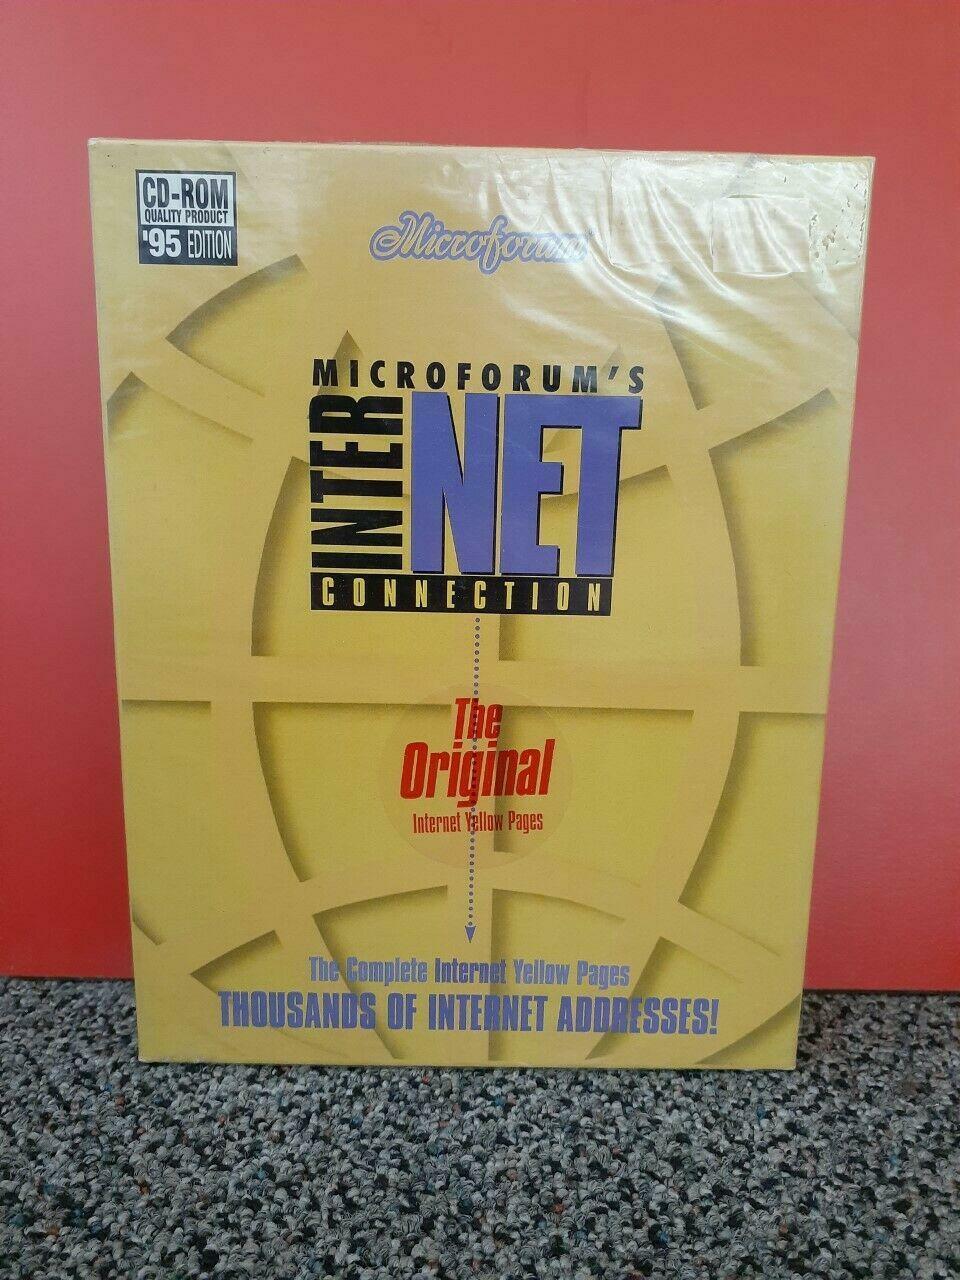 VINTAGE MICROFORUM'S INTERNET CONNECTION (CD-ROM) NOS Factory Sealed